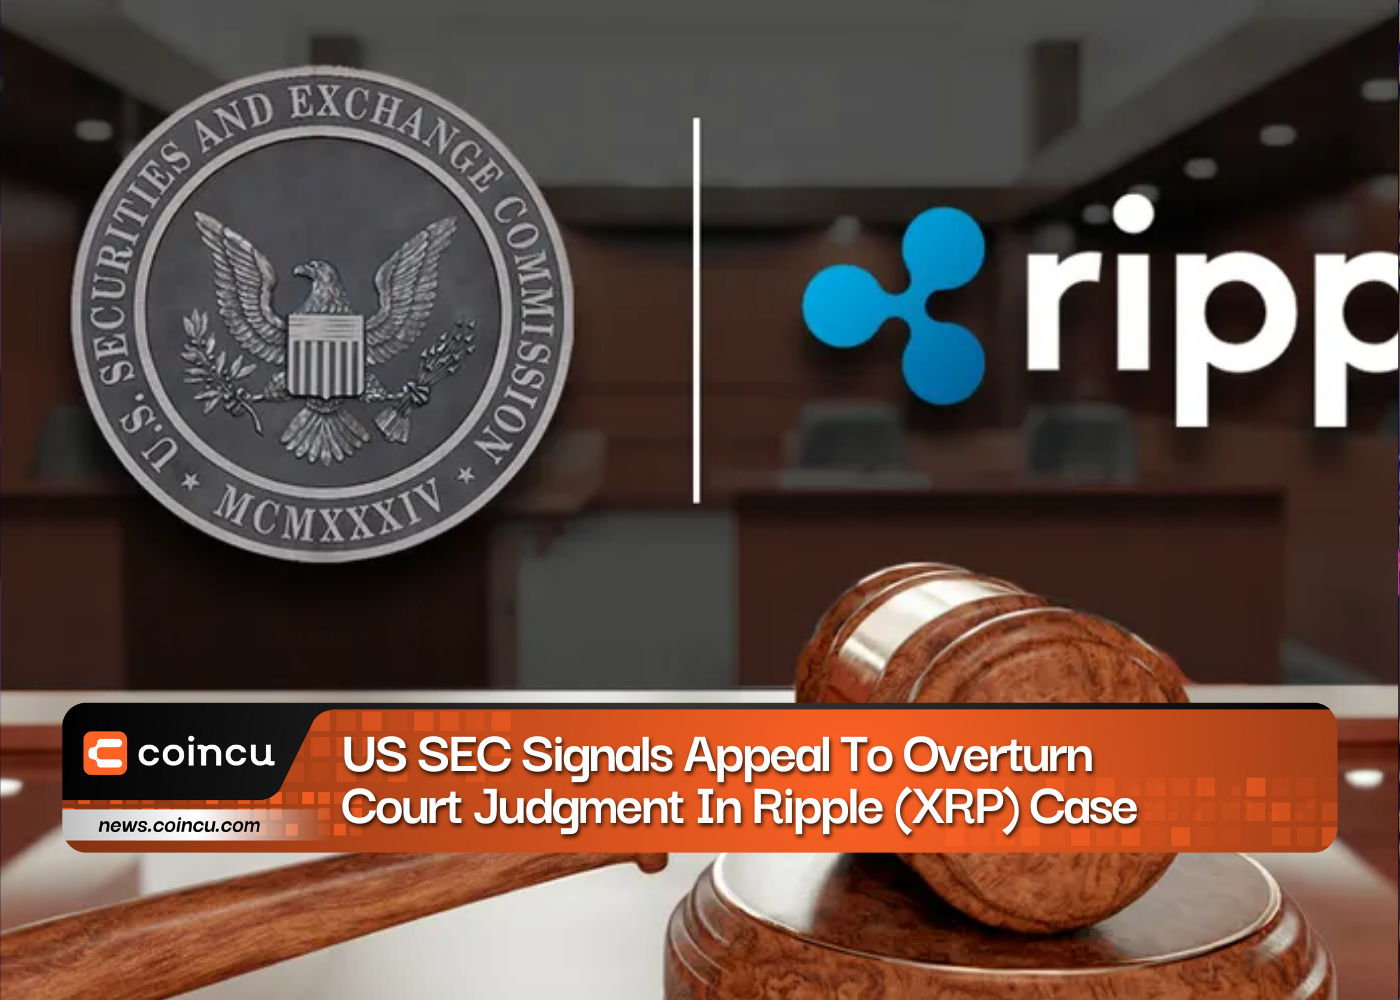 US SEC Signals Appeal To Overturn Court Judgment In Ripple (XRP) Case